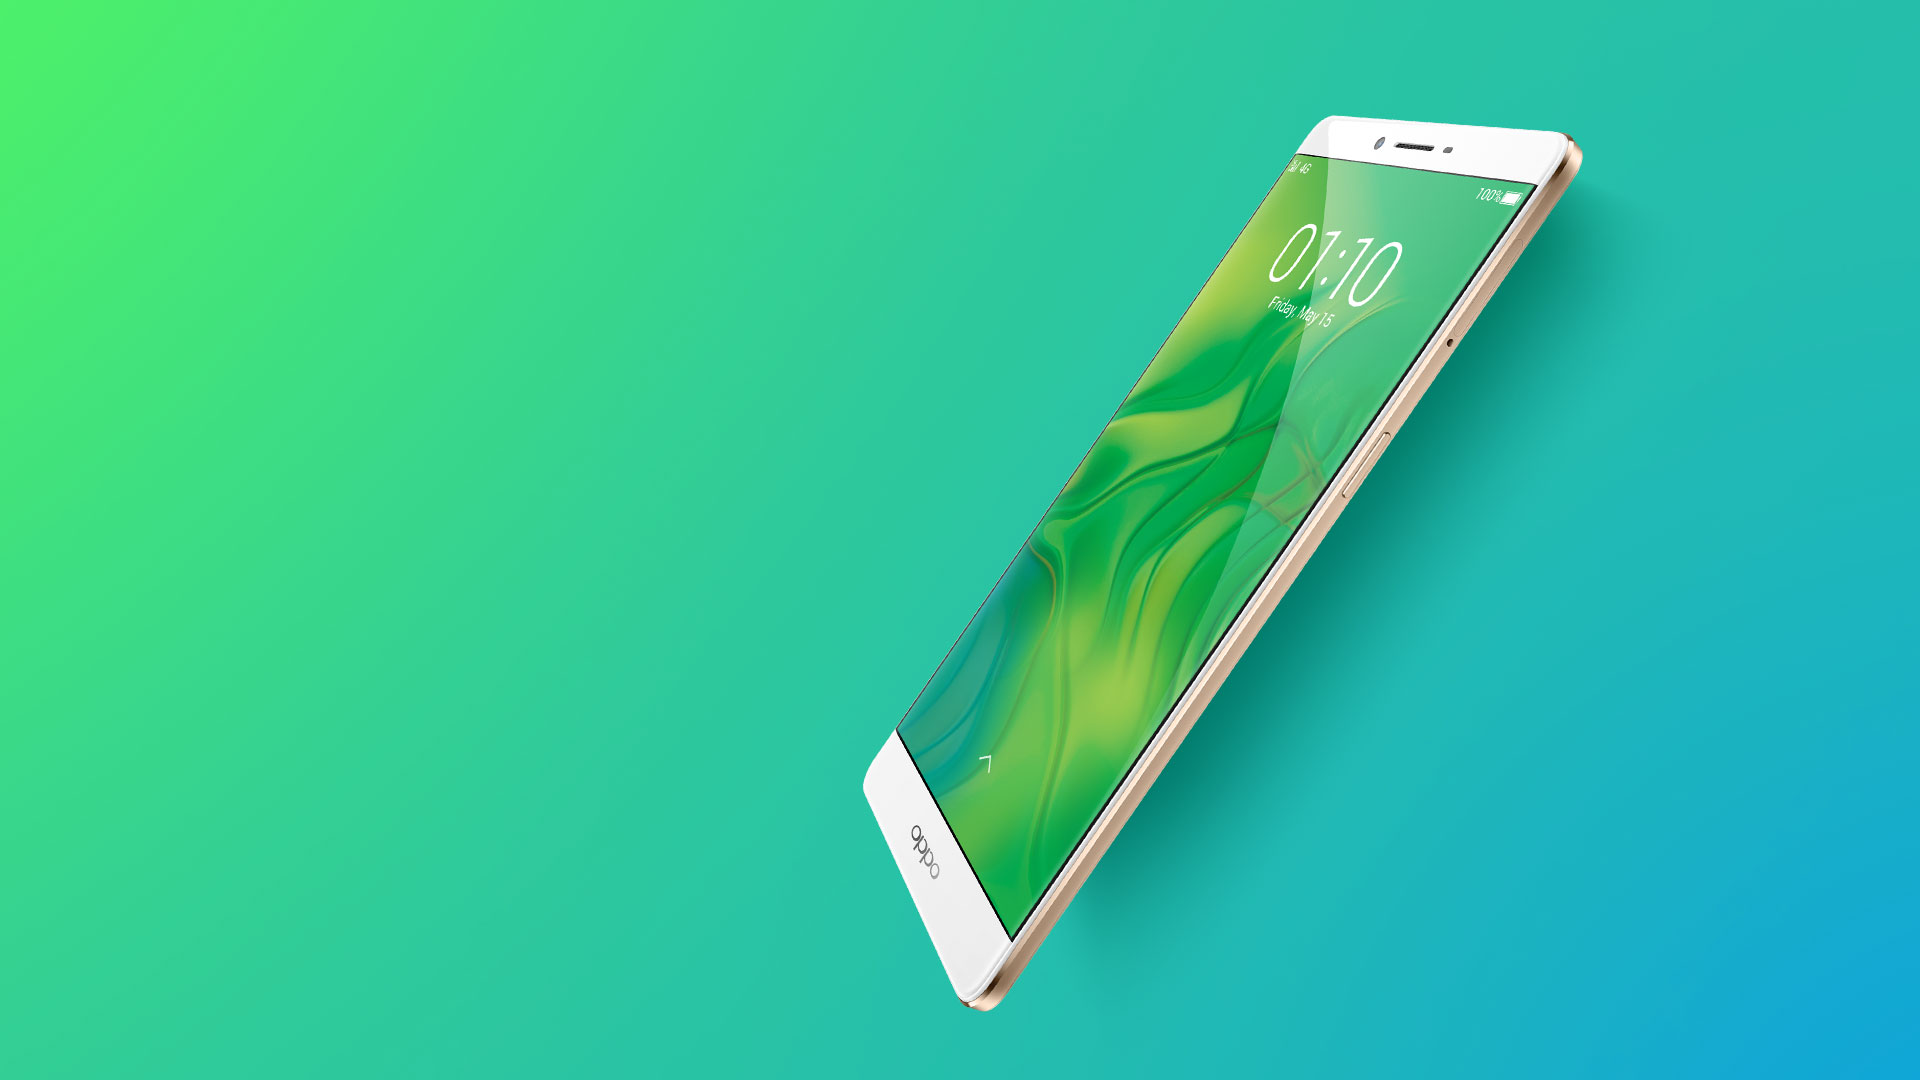 oppo f1s hd wallpaper,green,smartphone,gadget,mobile phone,material property